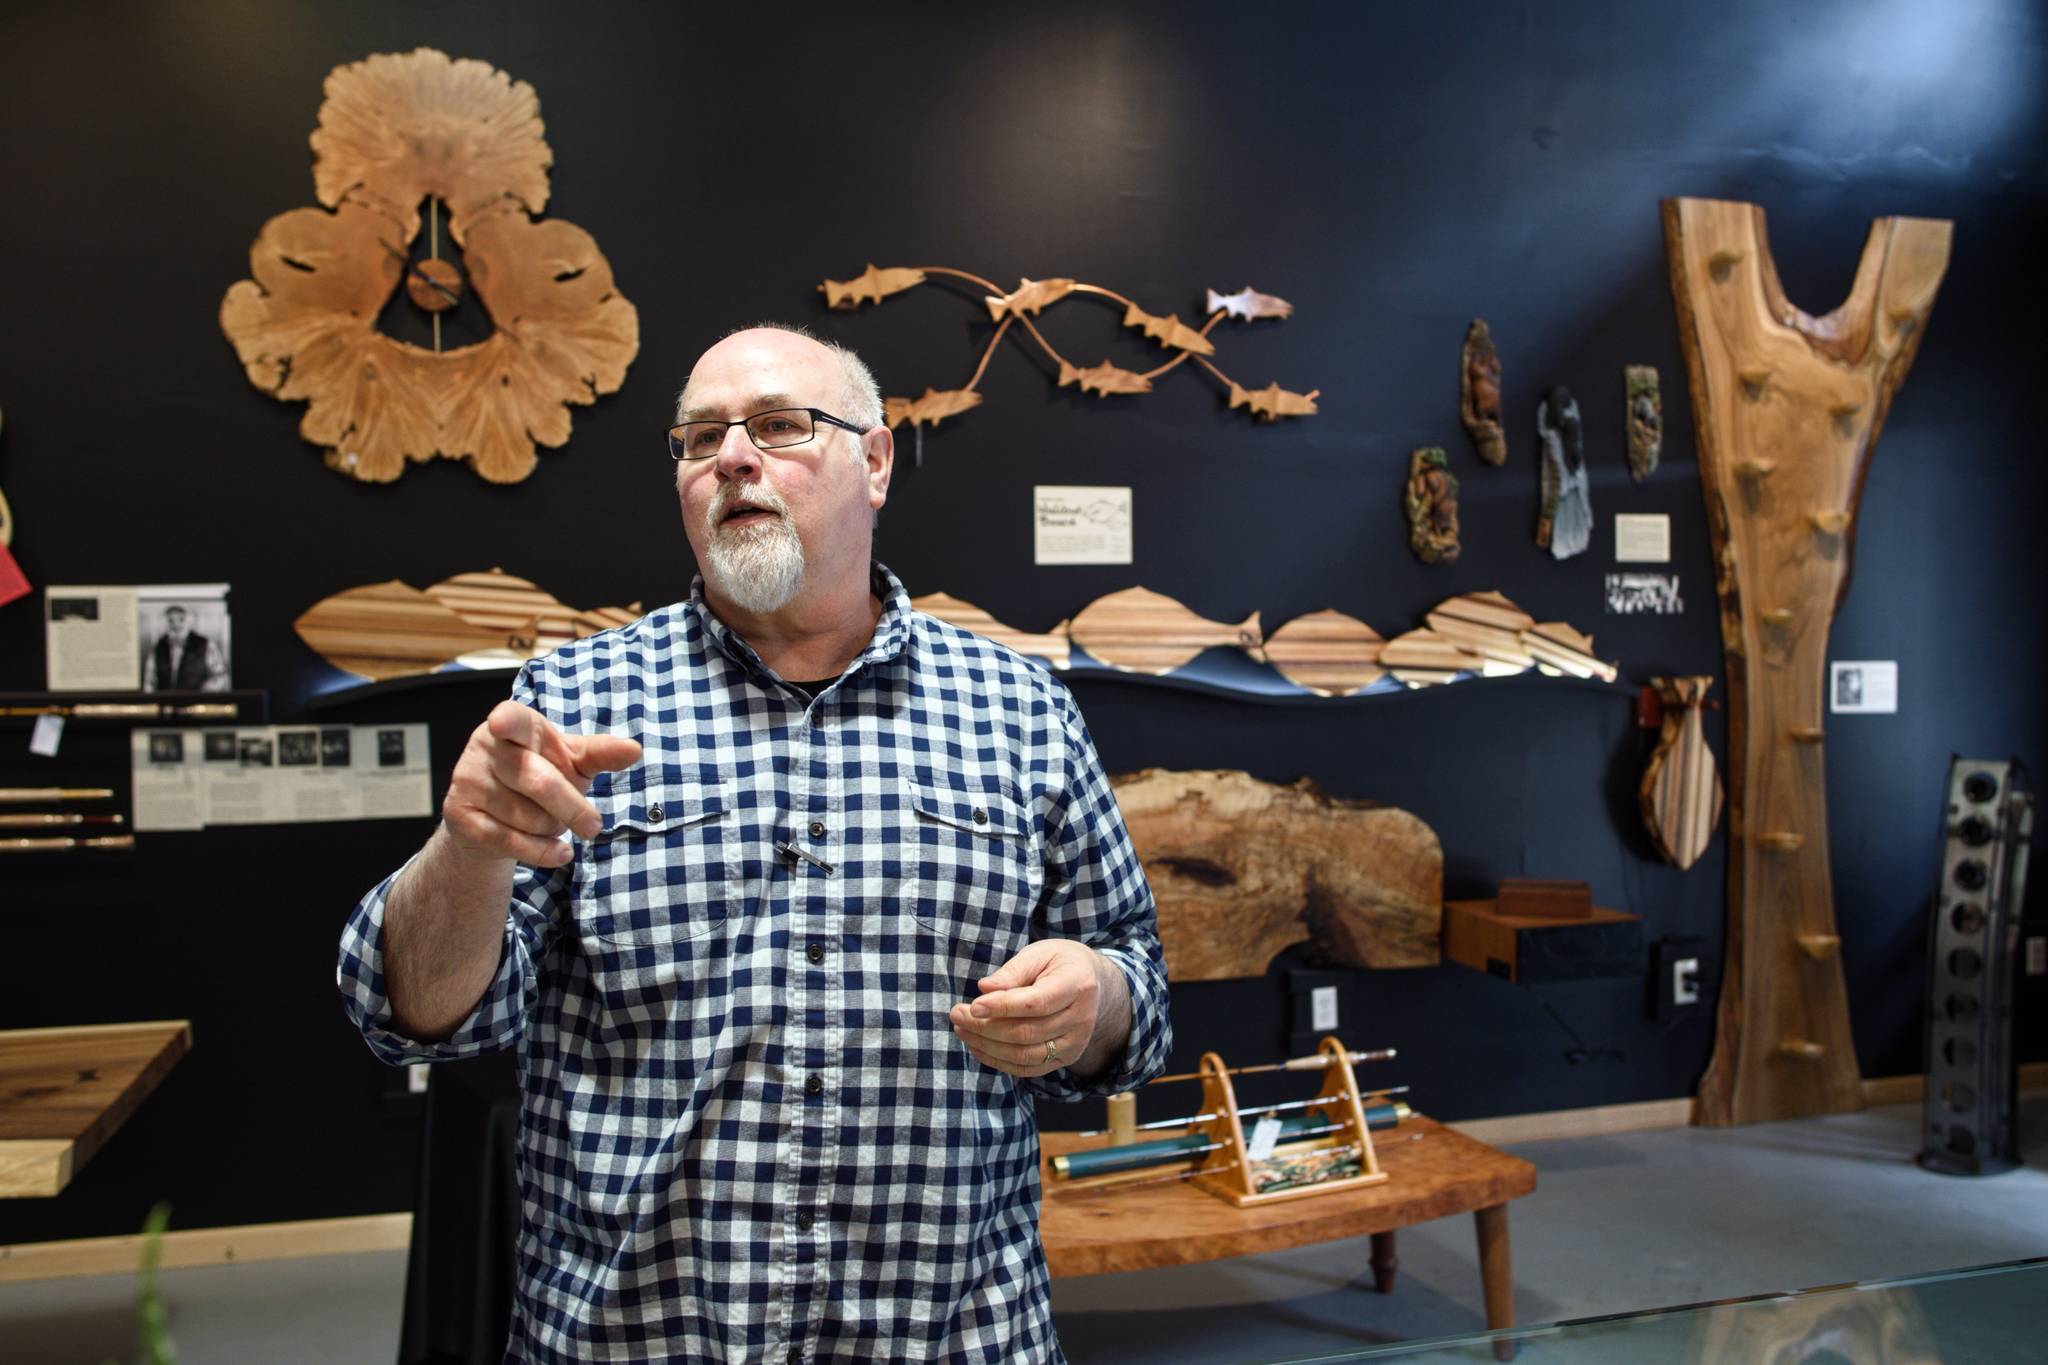 Dean Graber, owner of Rainforest Custom, talks Thursday, April 25, 2019, about his new shop on South Franklin Street that will display his and 14 other local artisans’ handicrafts. (Michael Penn | Juneau Empire)